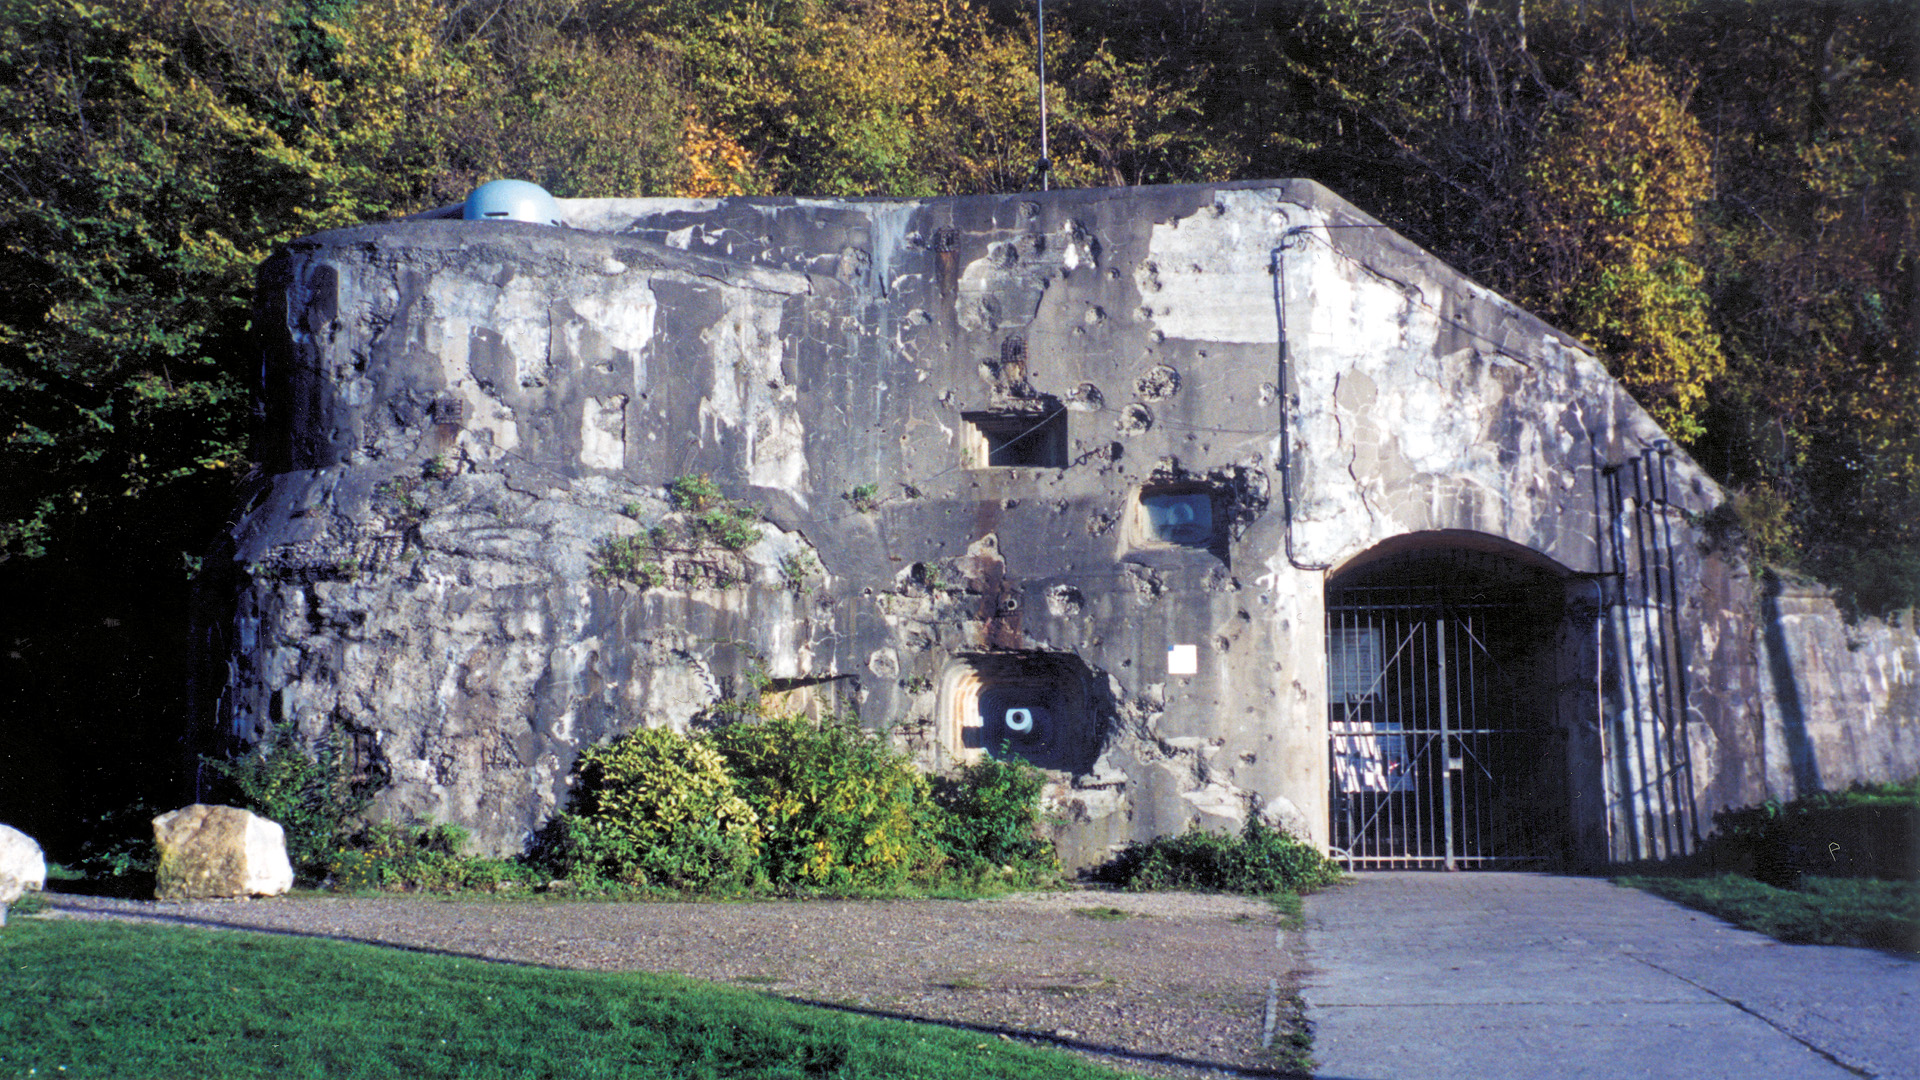 The battle-scarred façade of the main entrance to Eben Emael has changed little since its capture by daring German paratroopers in 1940.